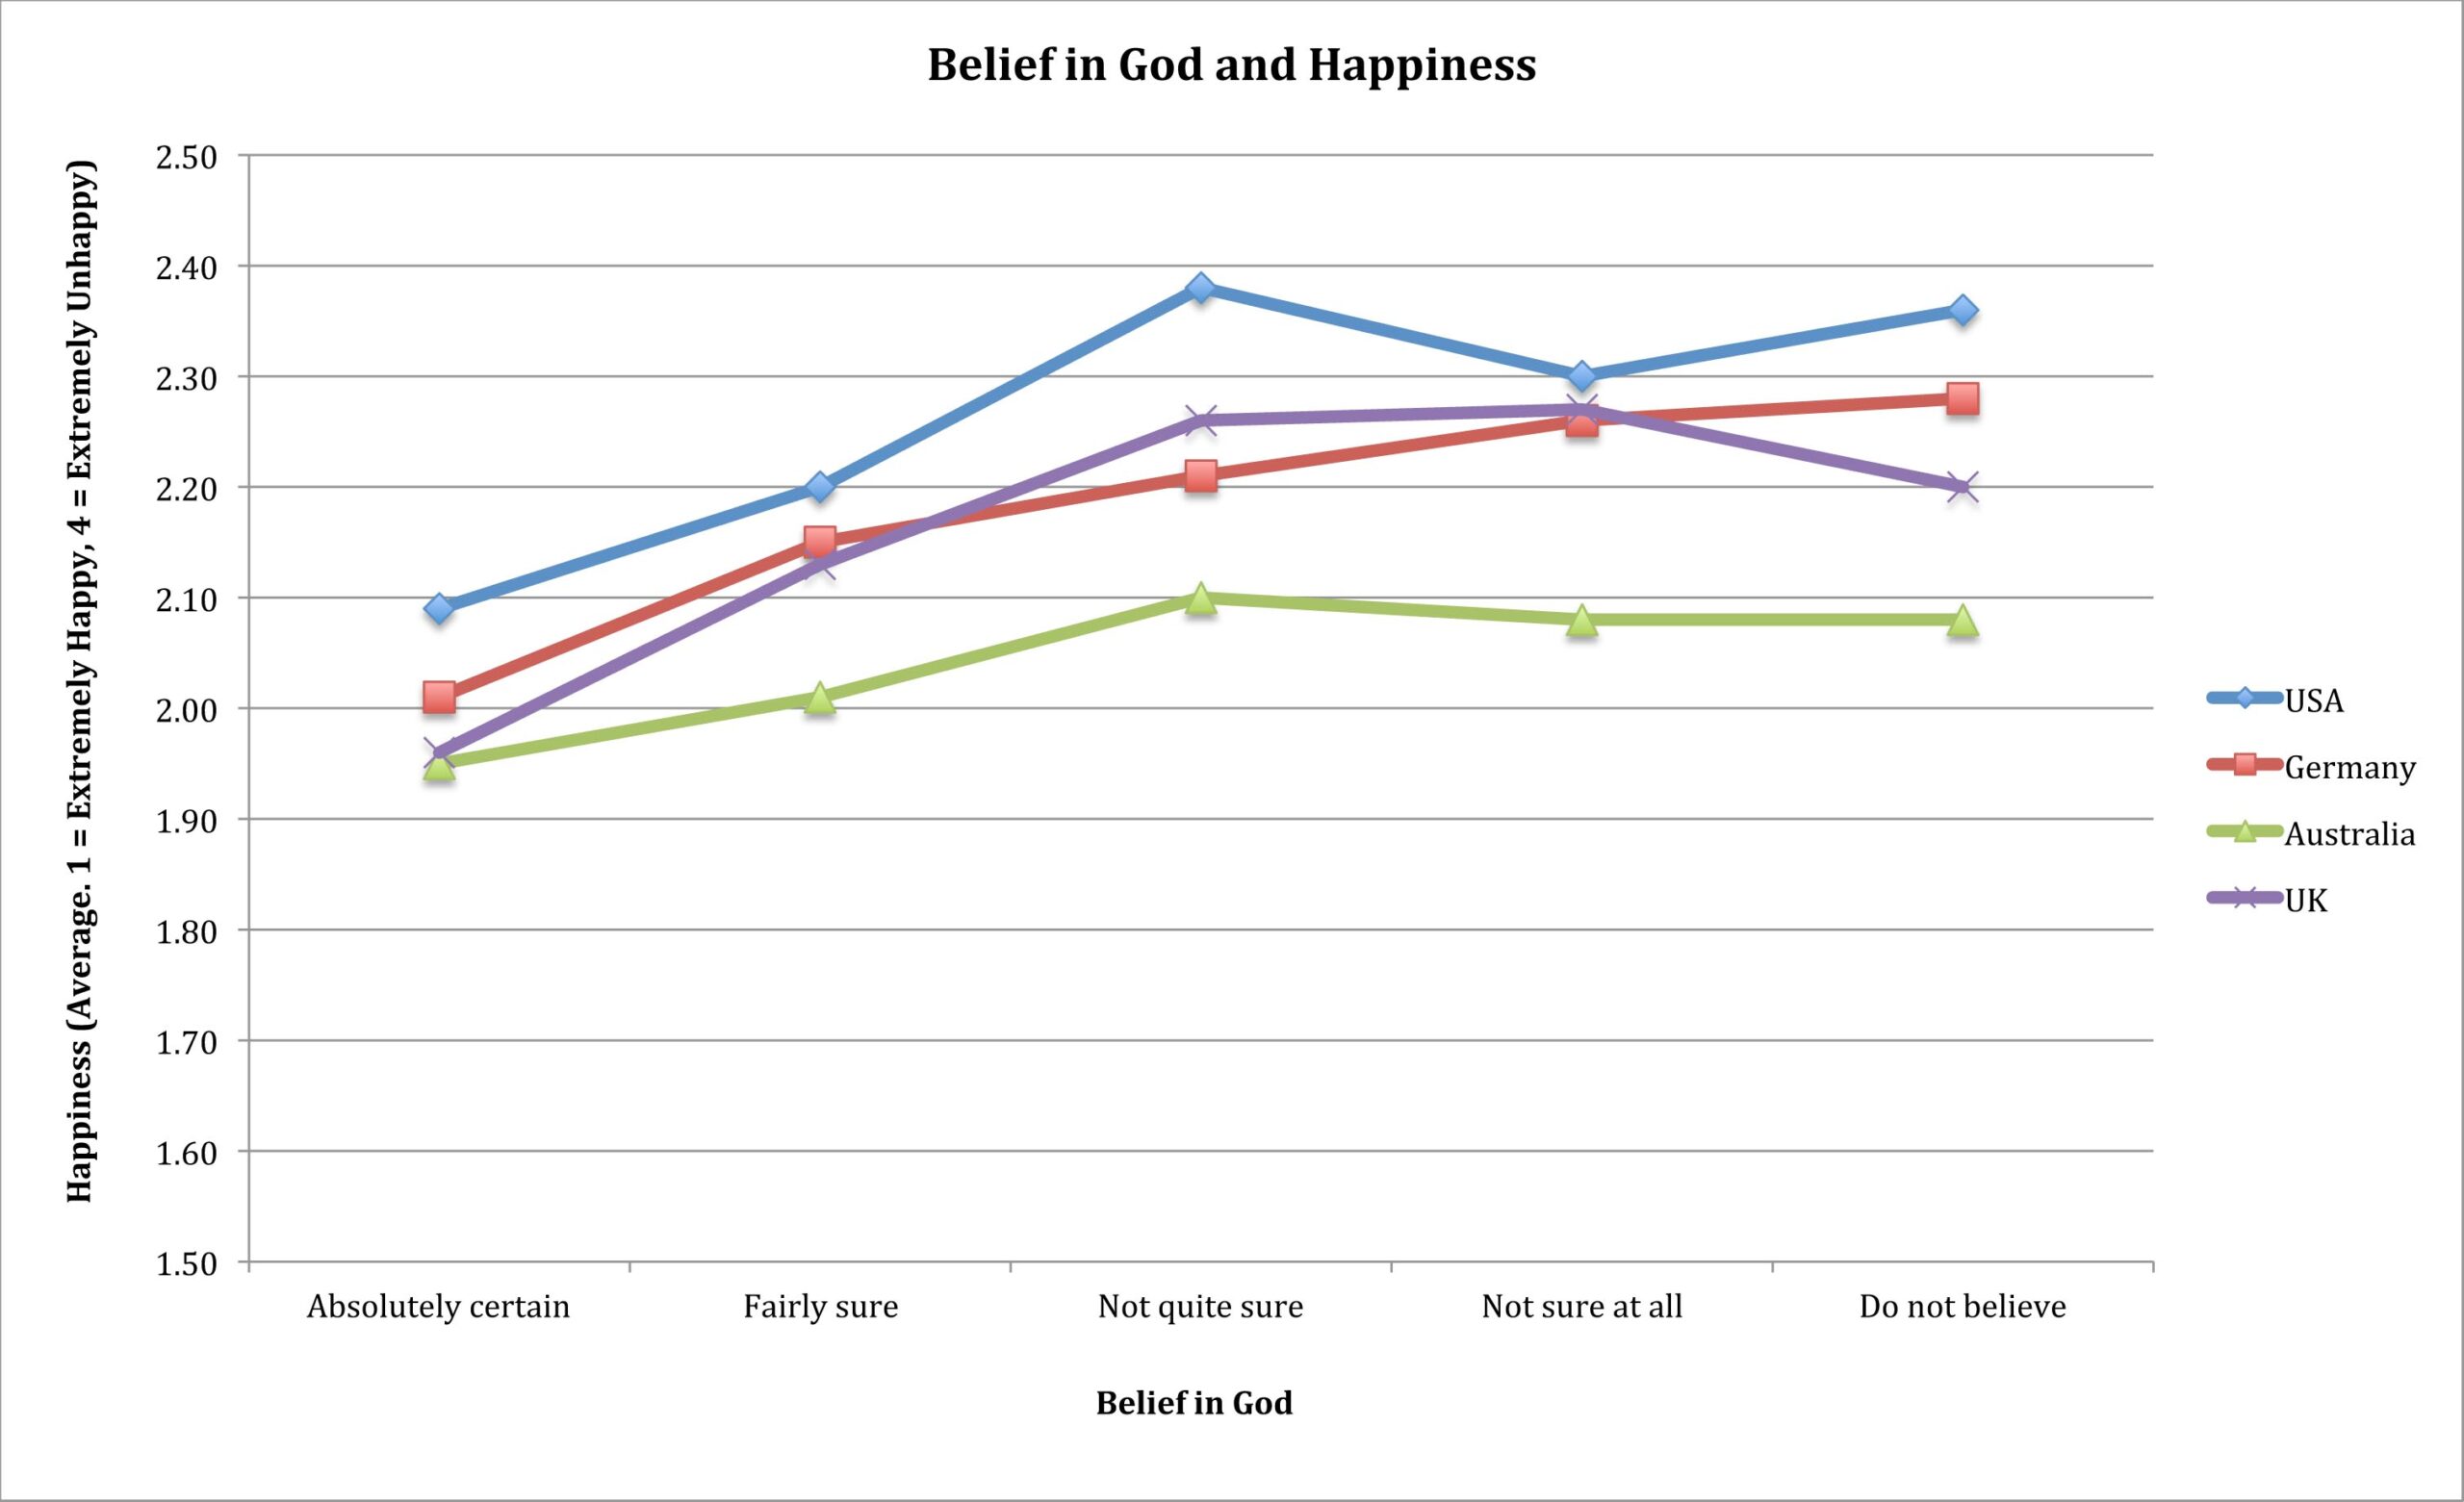 Are Conservatives Really “Happier” Than Liberals?